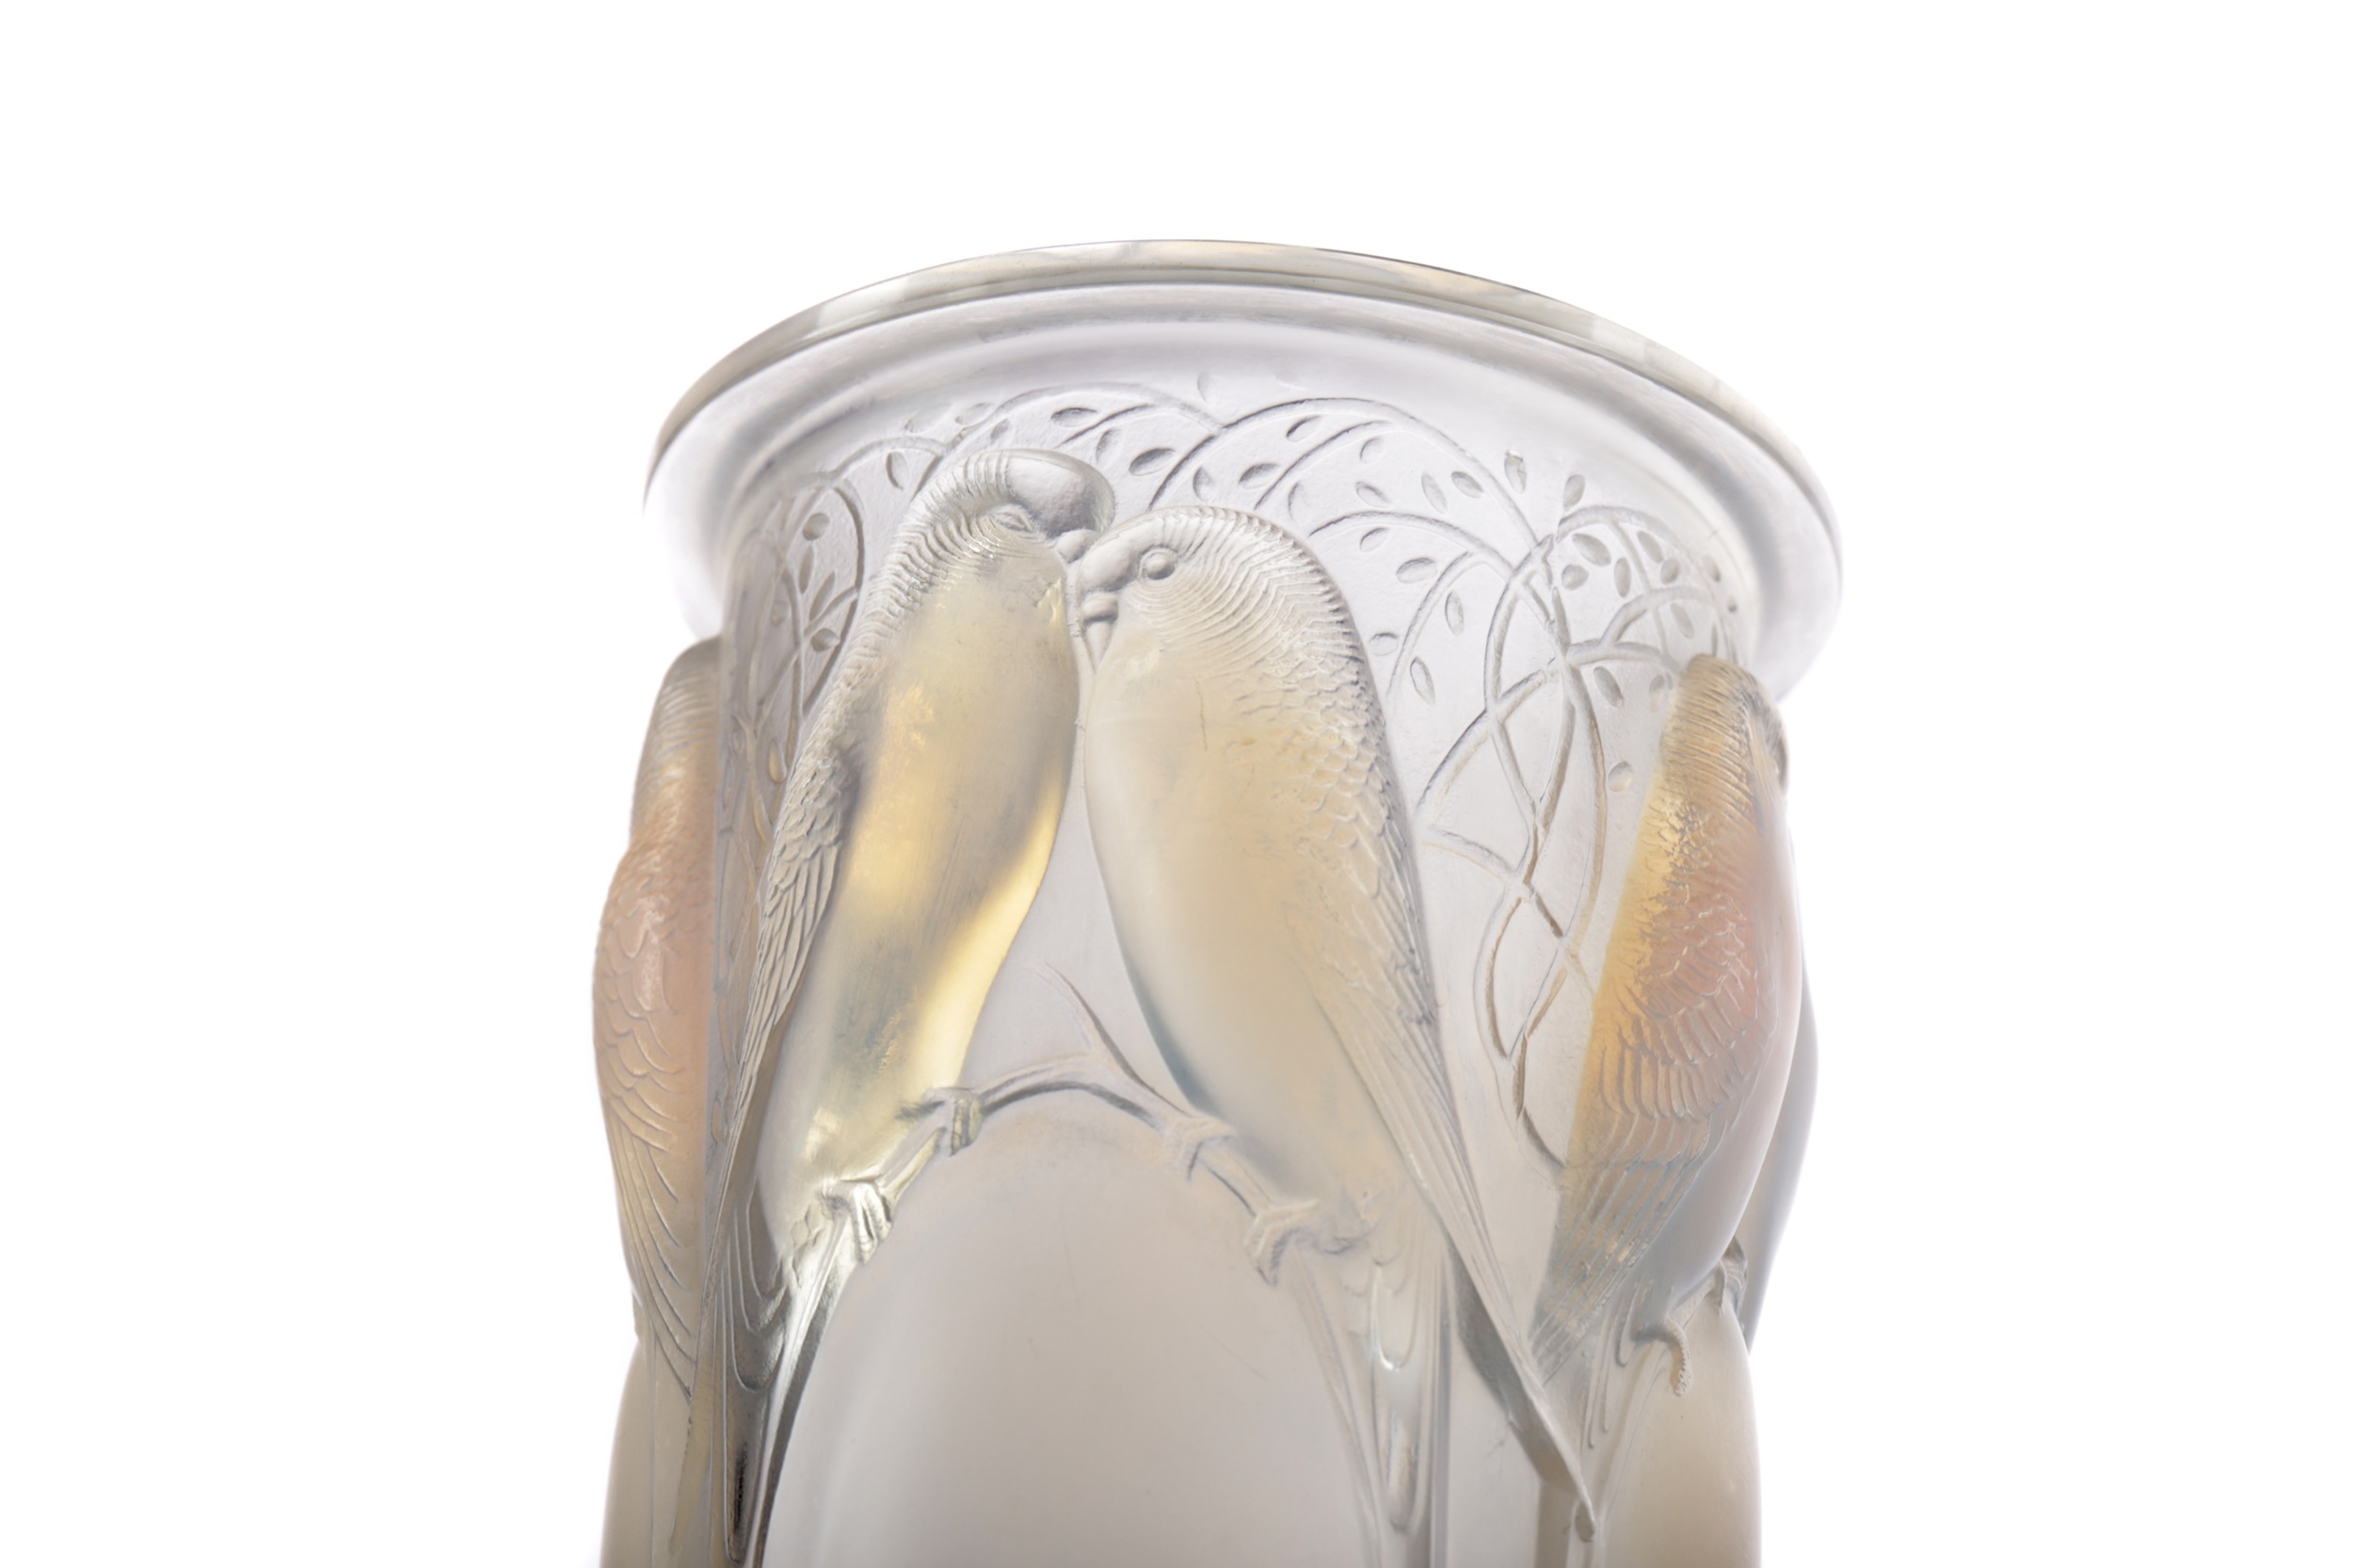 A LALIQUE 'CEYLAN' PATTERN OPALESCENT GLASS VASE - Image 3 of 3